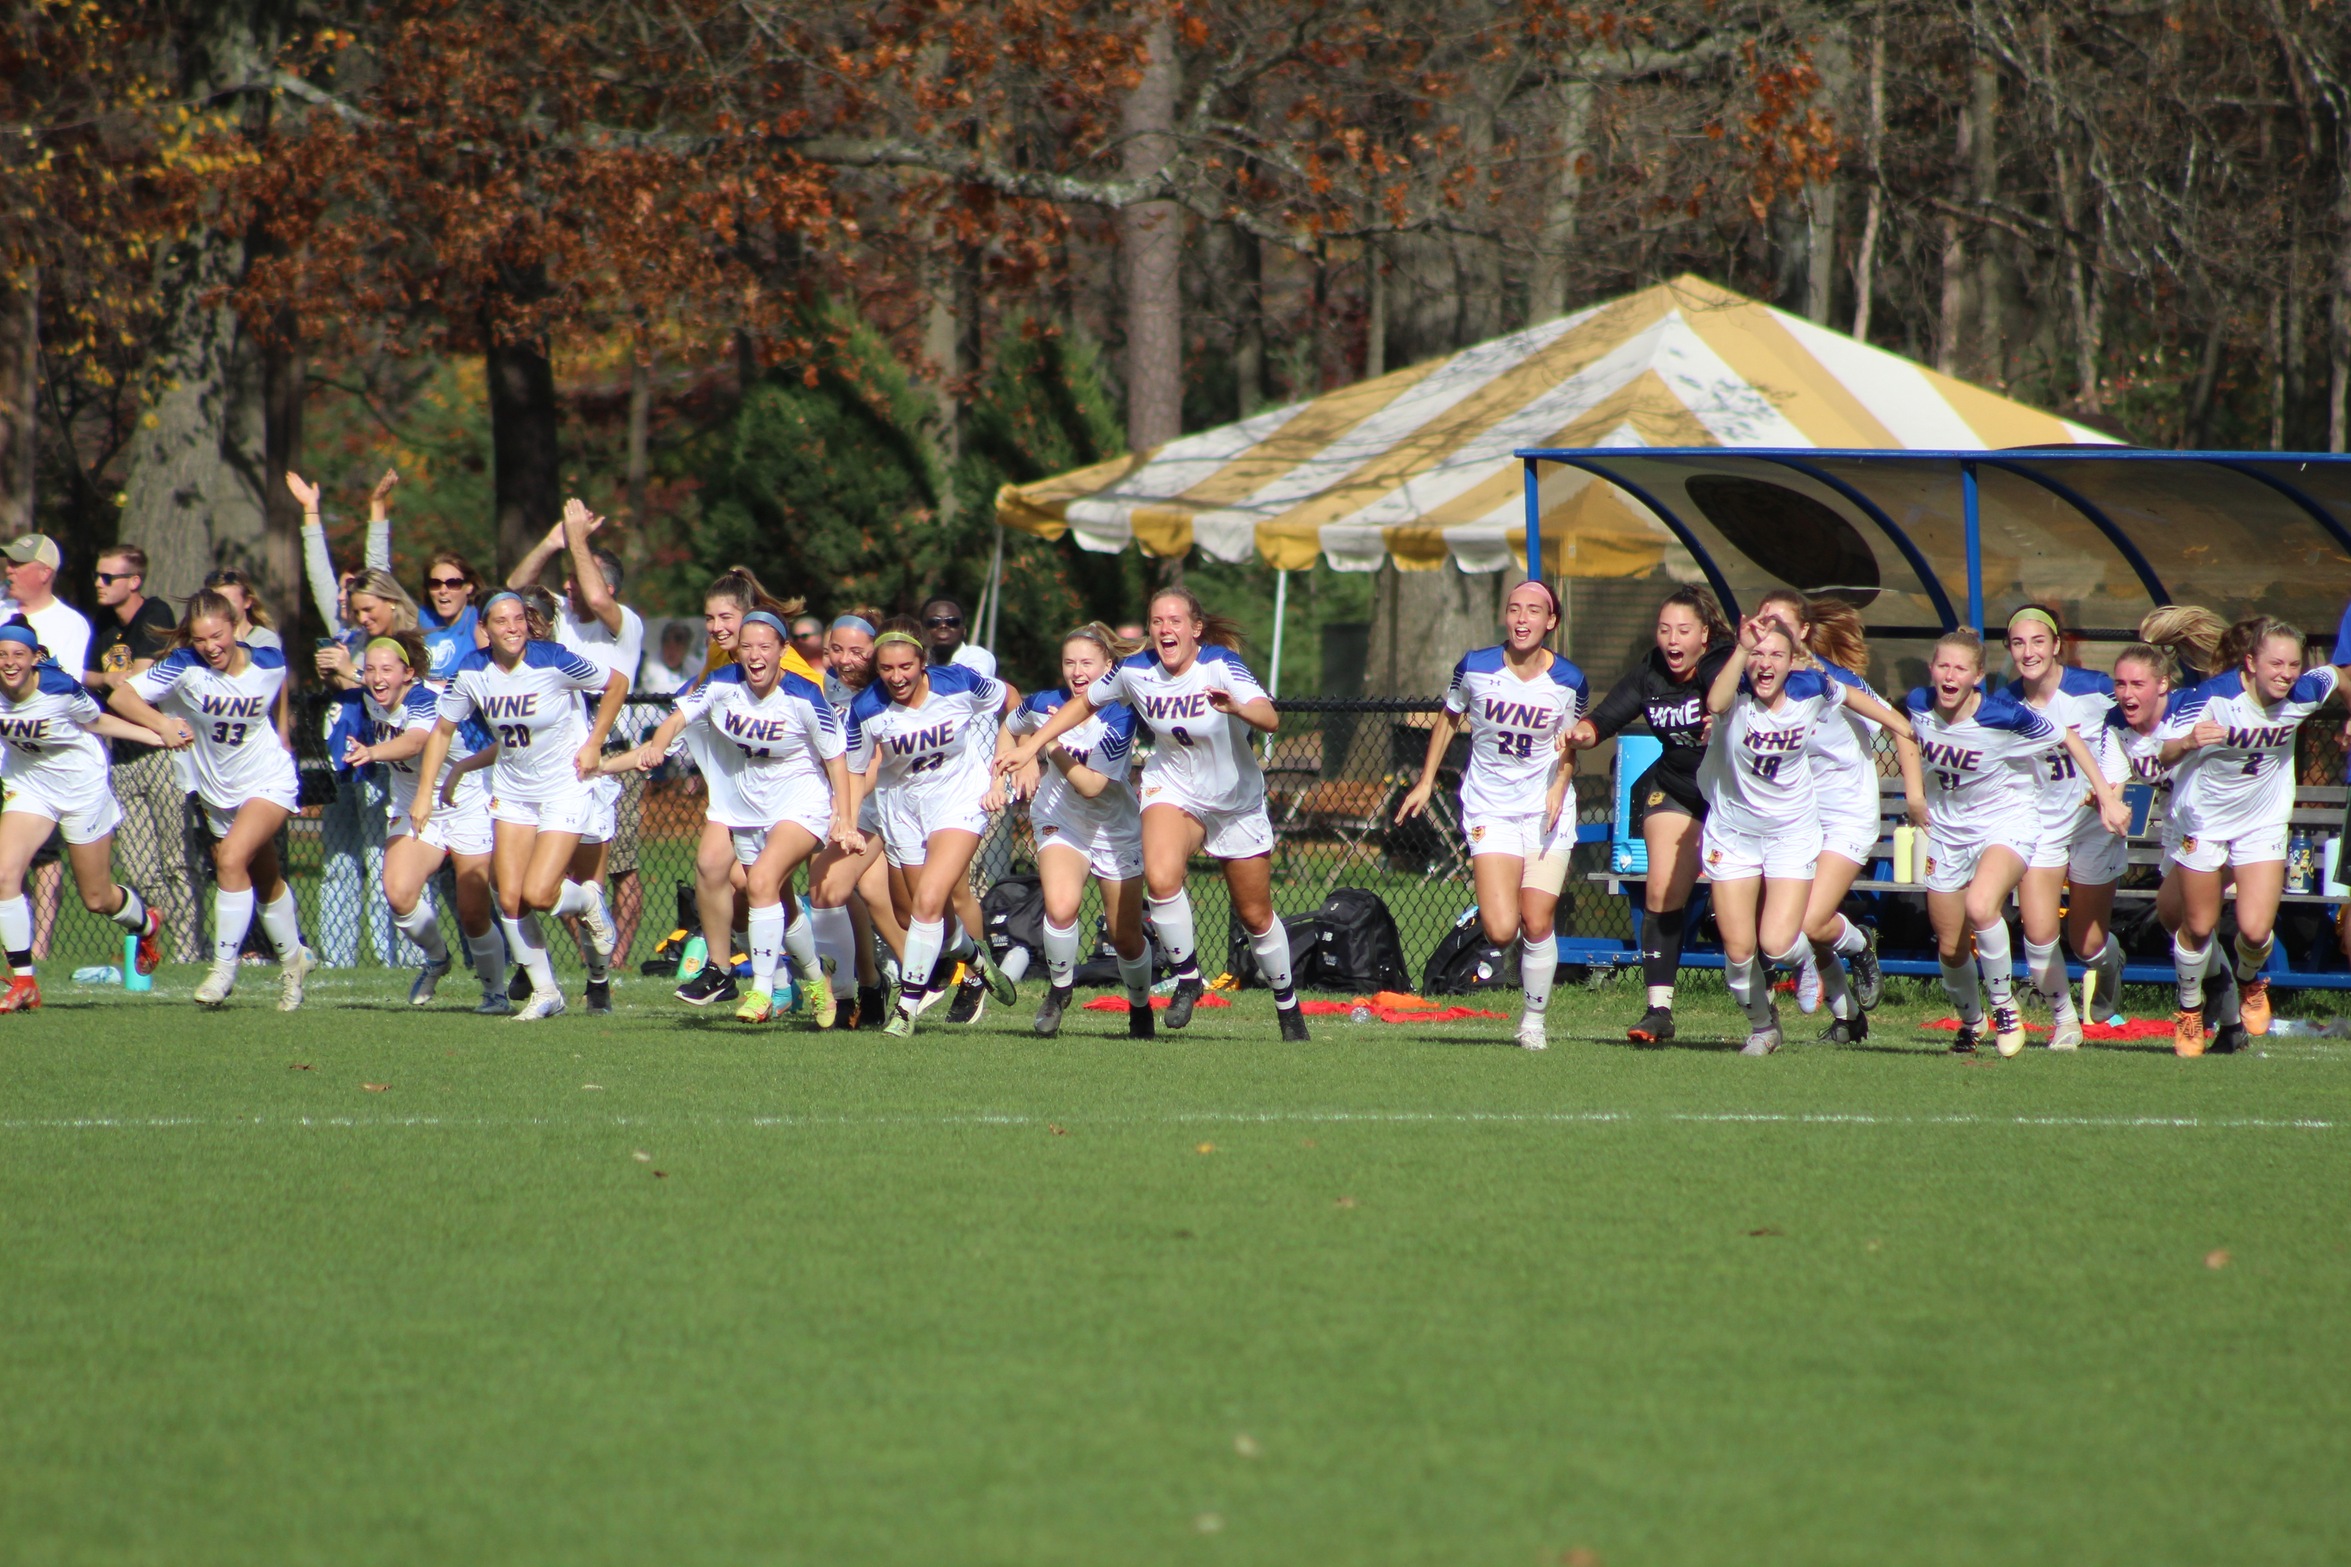 Women&rsquo;s Soccer Takes on Top Seeded Misericordia University in NCAA Division III Women&rsquo;s Soccer Championships Second Round